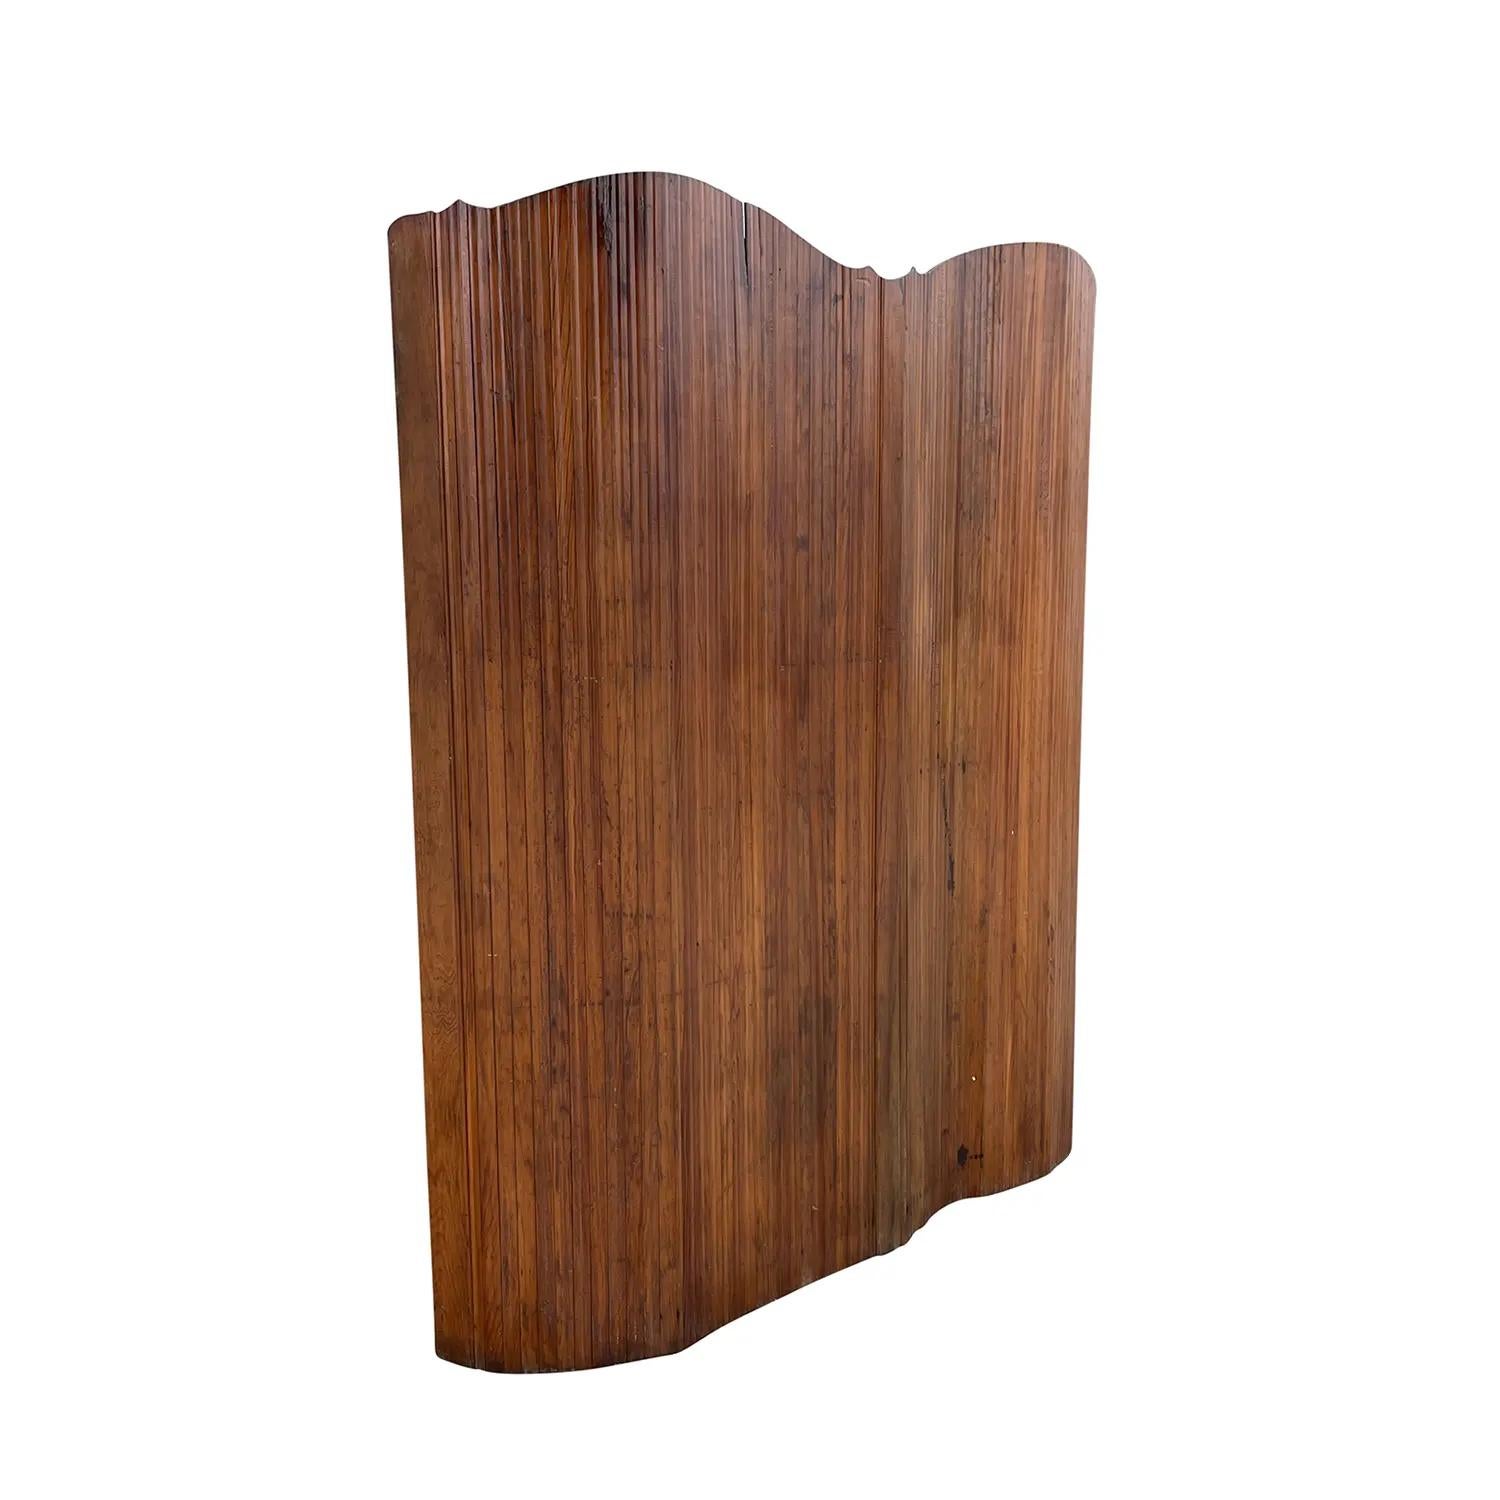 A dark-brown, antique Mid-Century Modern style Danish room divider made of hand crafted Beechwood, in good condition. The width, length of the Scandinavian screen is adjustable, composed with the original brass lock. Each wood element is has a